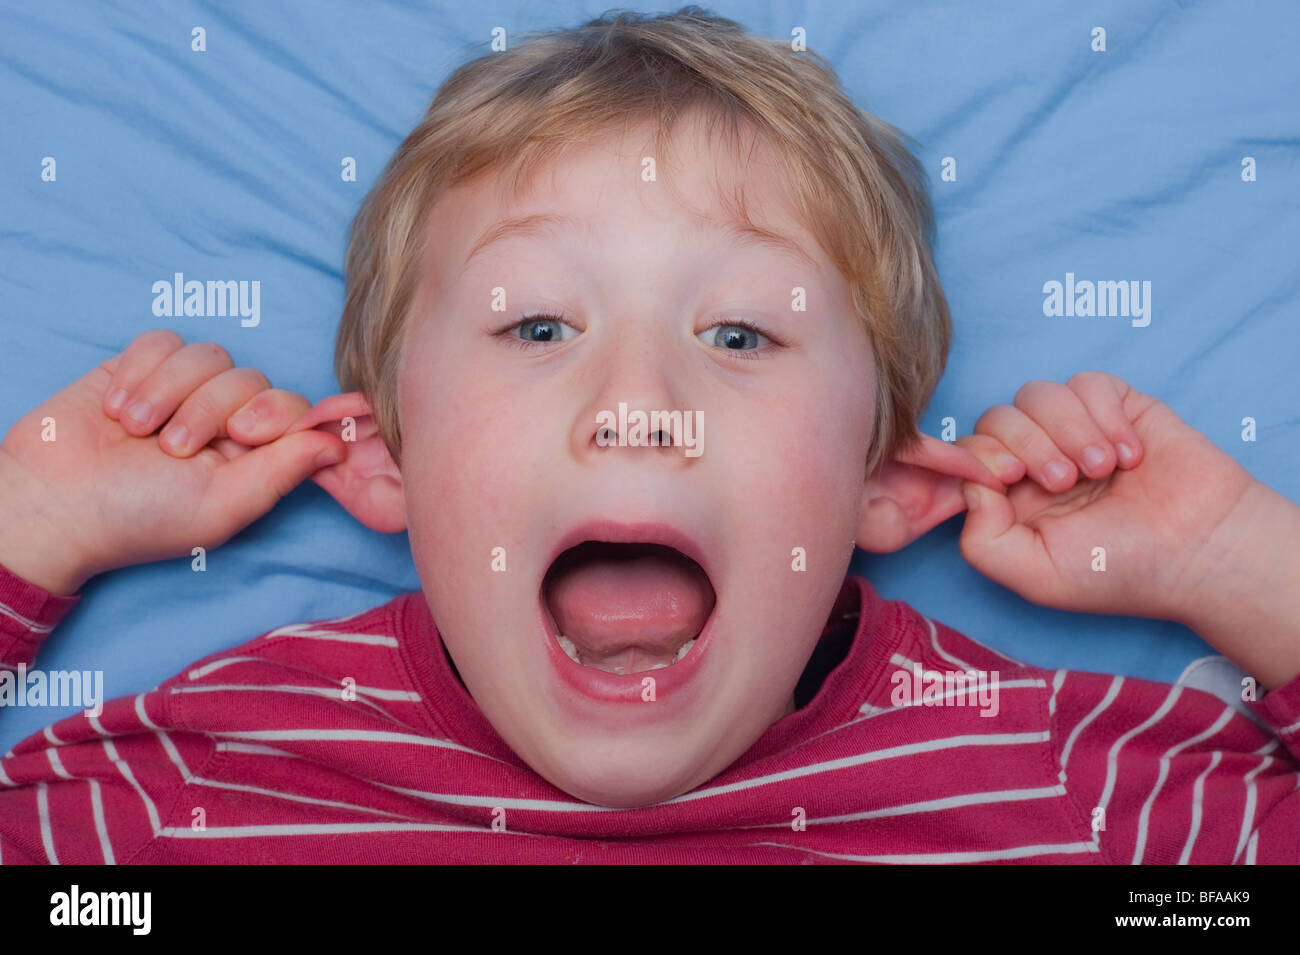 A Model Released picture of a six year old boy pulling a silly face indoors in the Uk Stock Photo